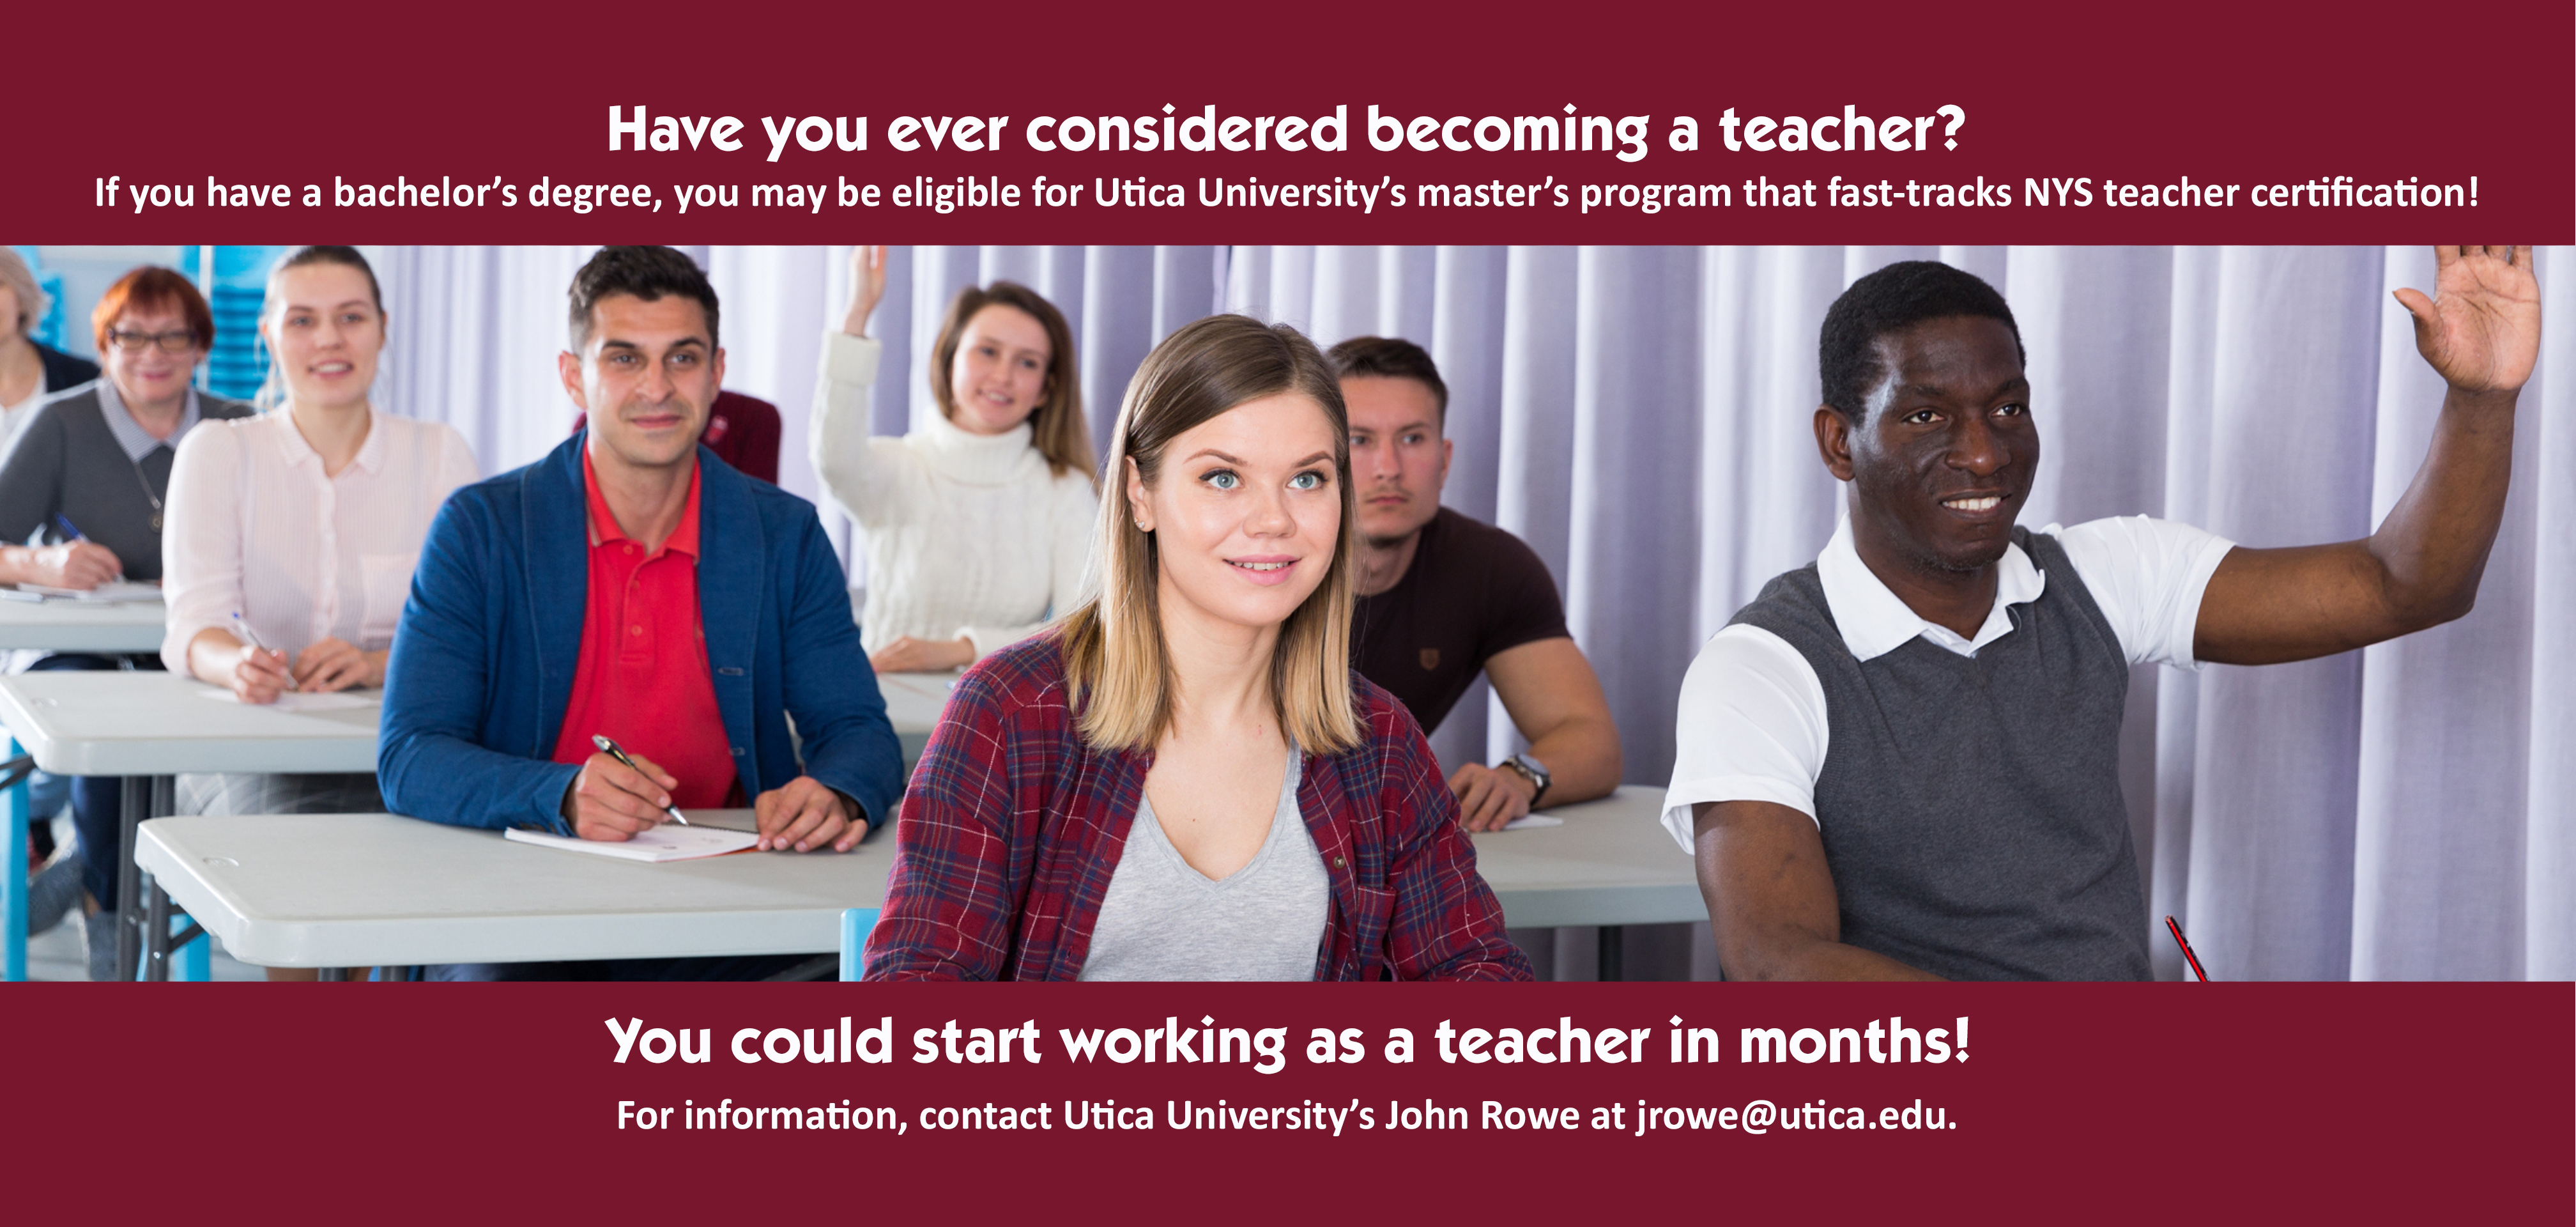 Have you ever considered being a teacher. Send an email to jrowe@utica.edu at Utica University for more information.